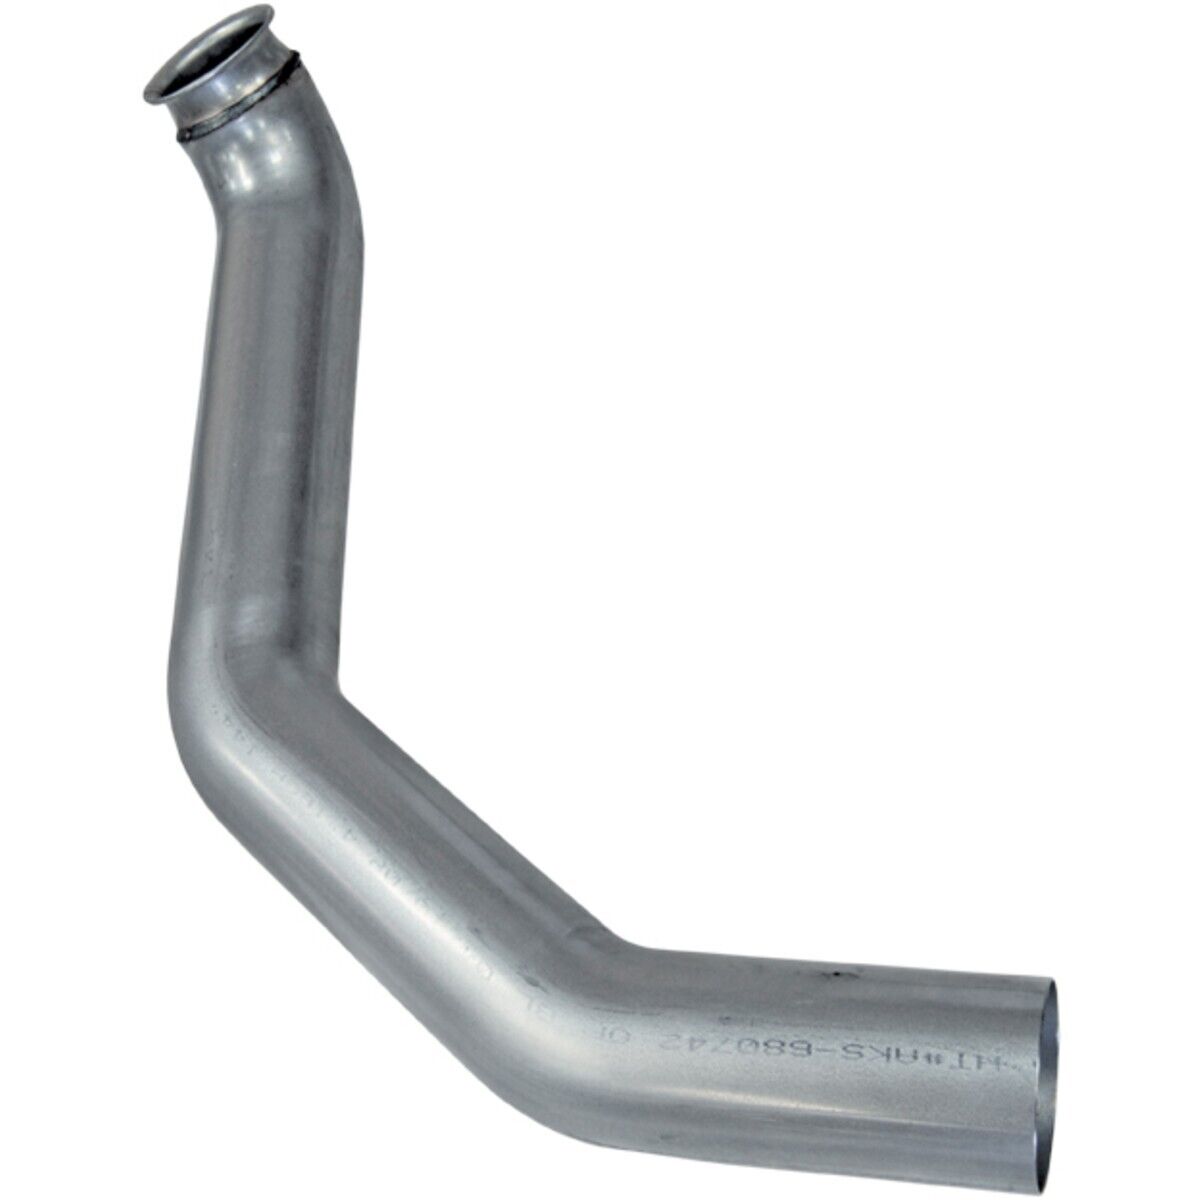 1078 Flowmaster Down Pipe for F250 Truck F350 F450 F550 Ford F-250 Super Duty